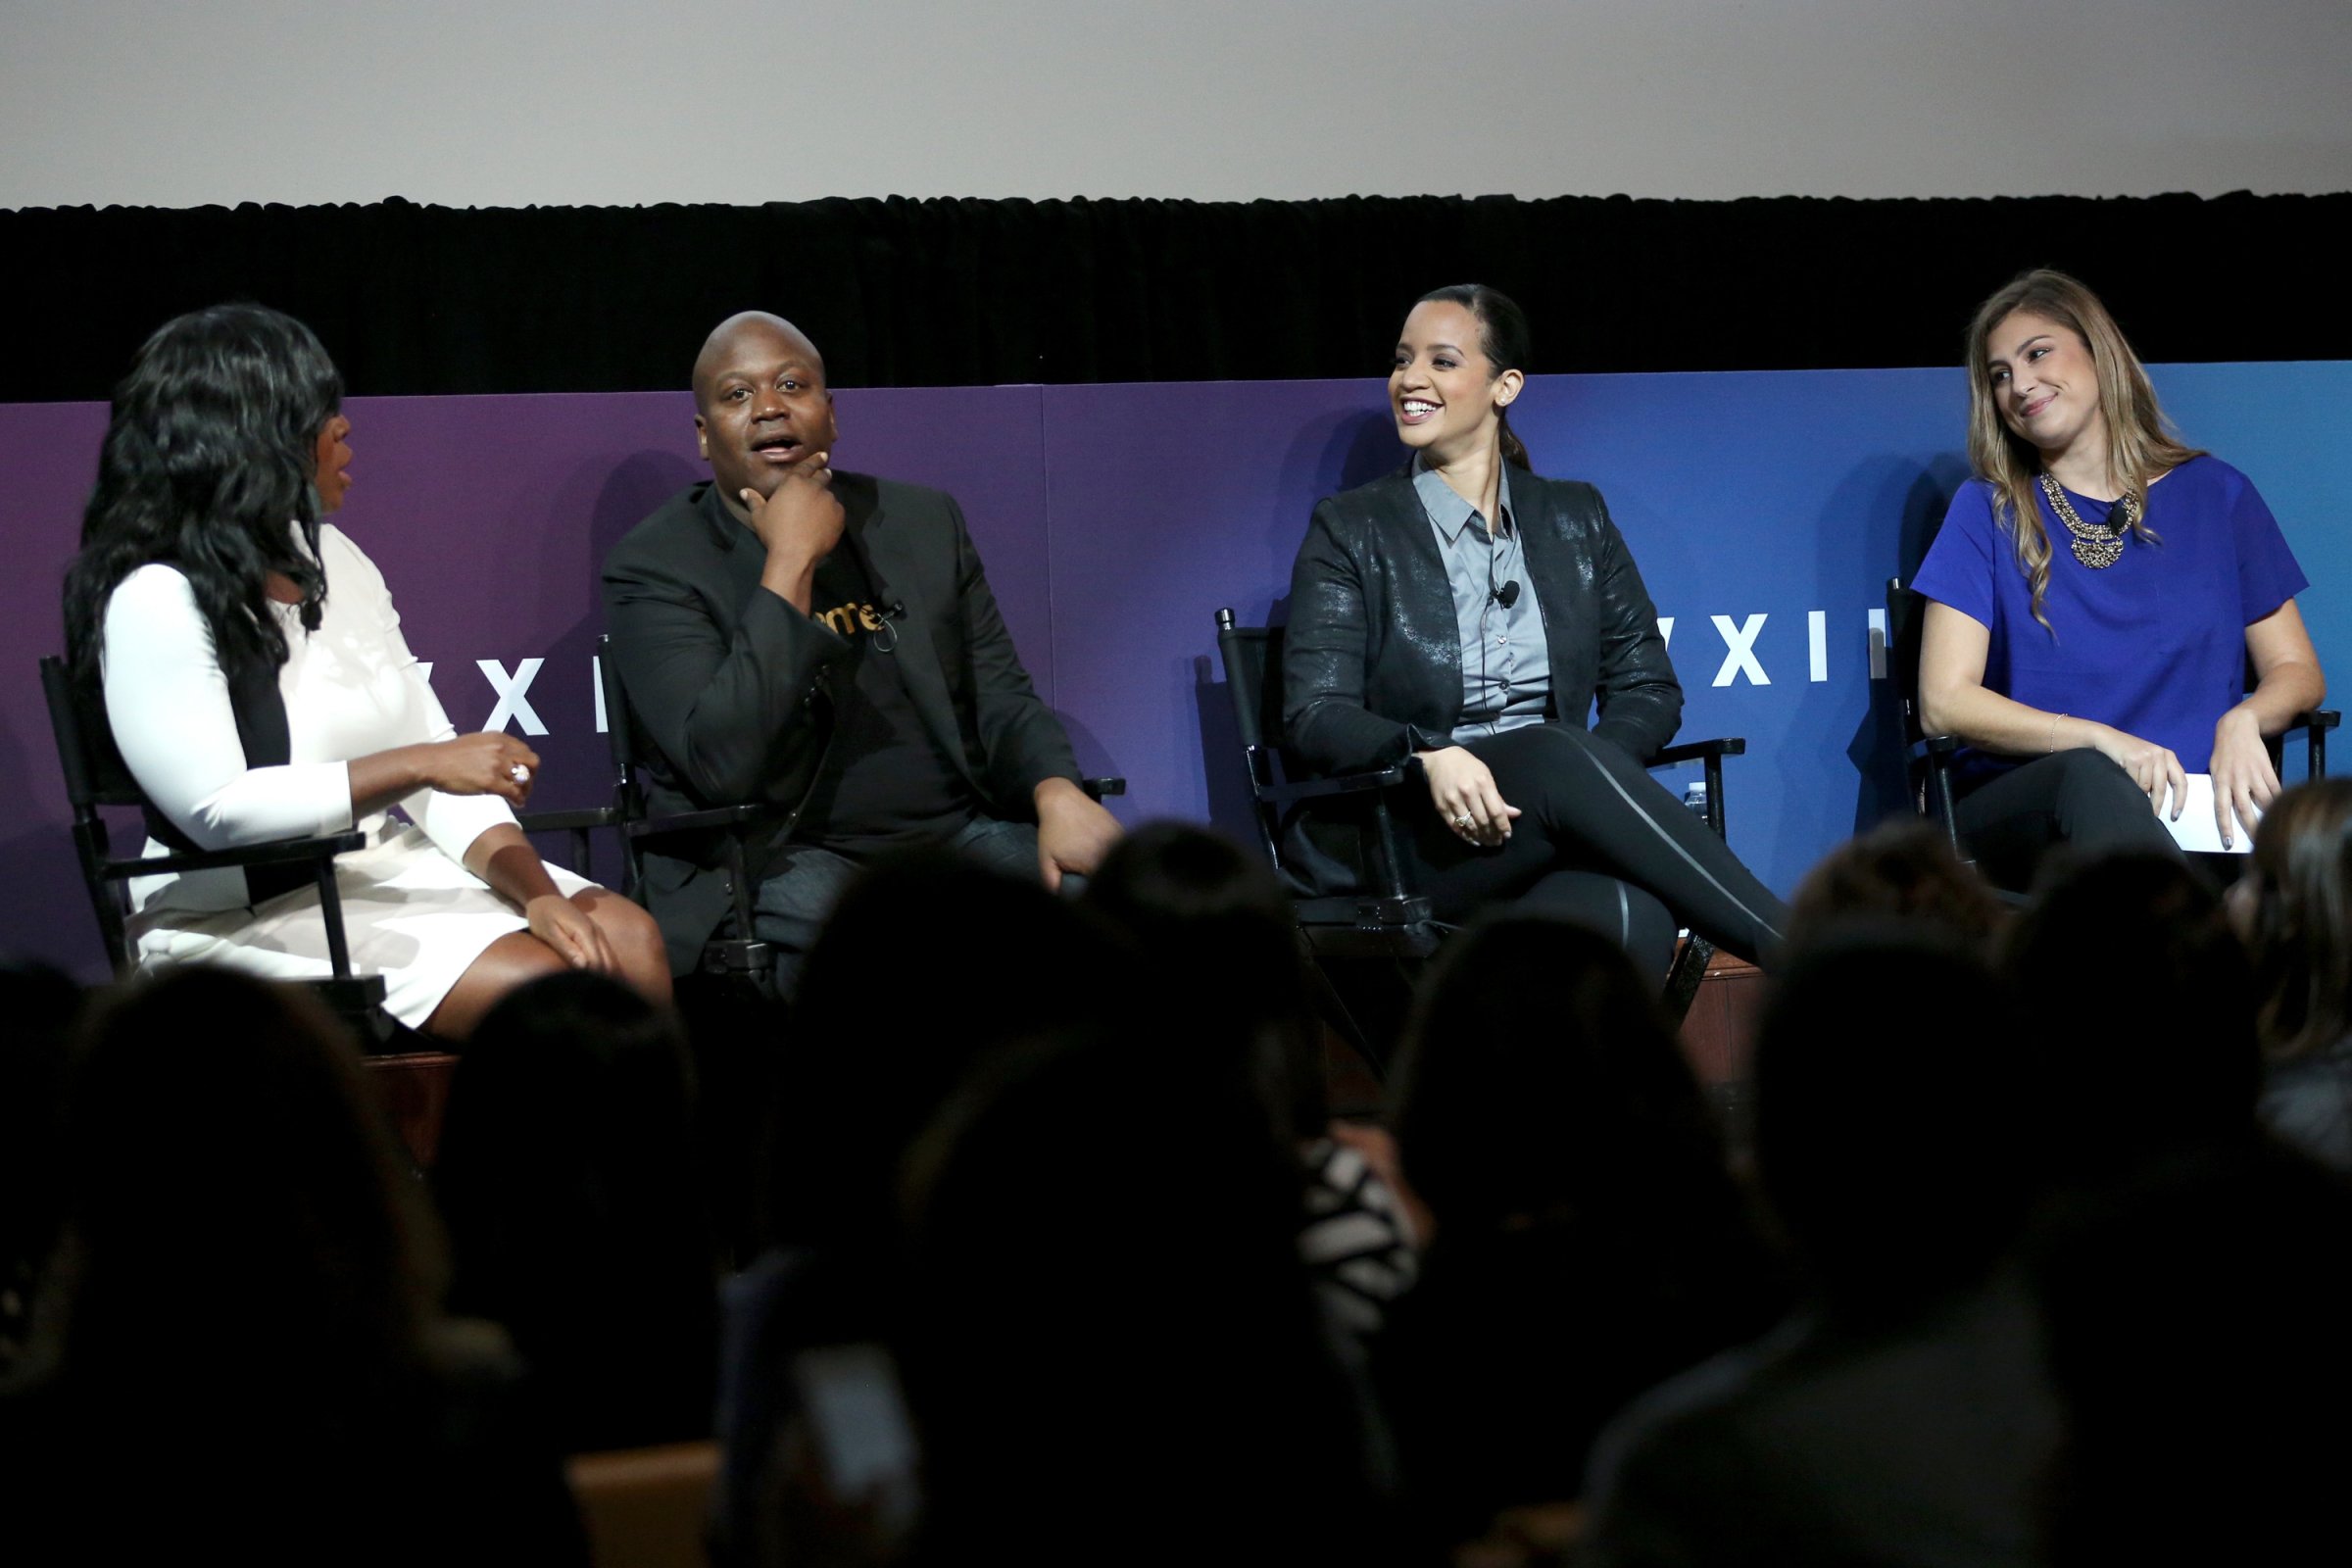 Actors Uzo Aduba, Tituss Burgess and Dascha Polanco speak on a panel moderated by WhoSay Editorial Director Kirstin Benson during Advertising Week 2015 on September 29, 2015 in New York City.